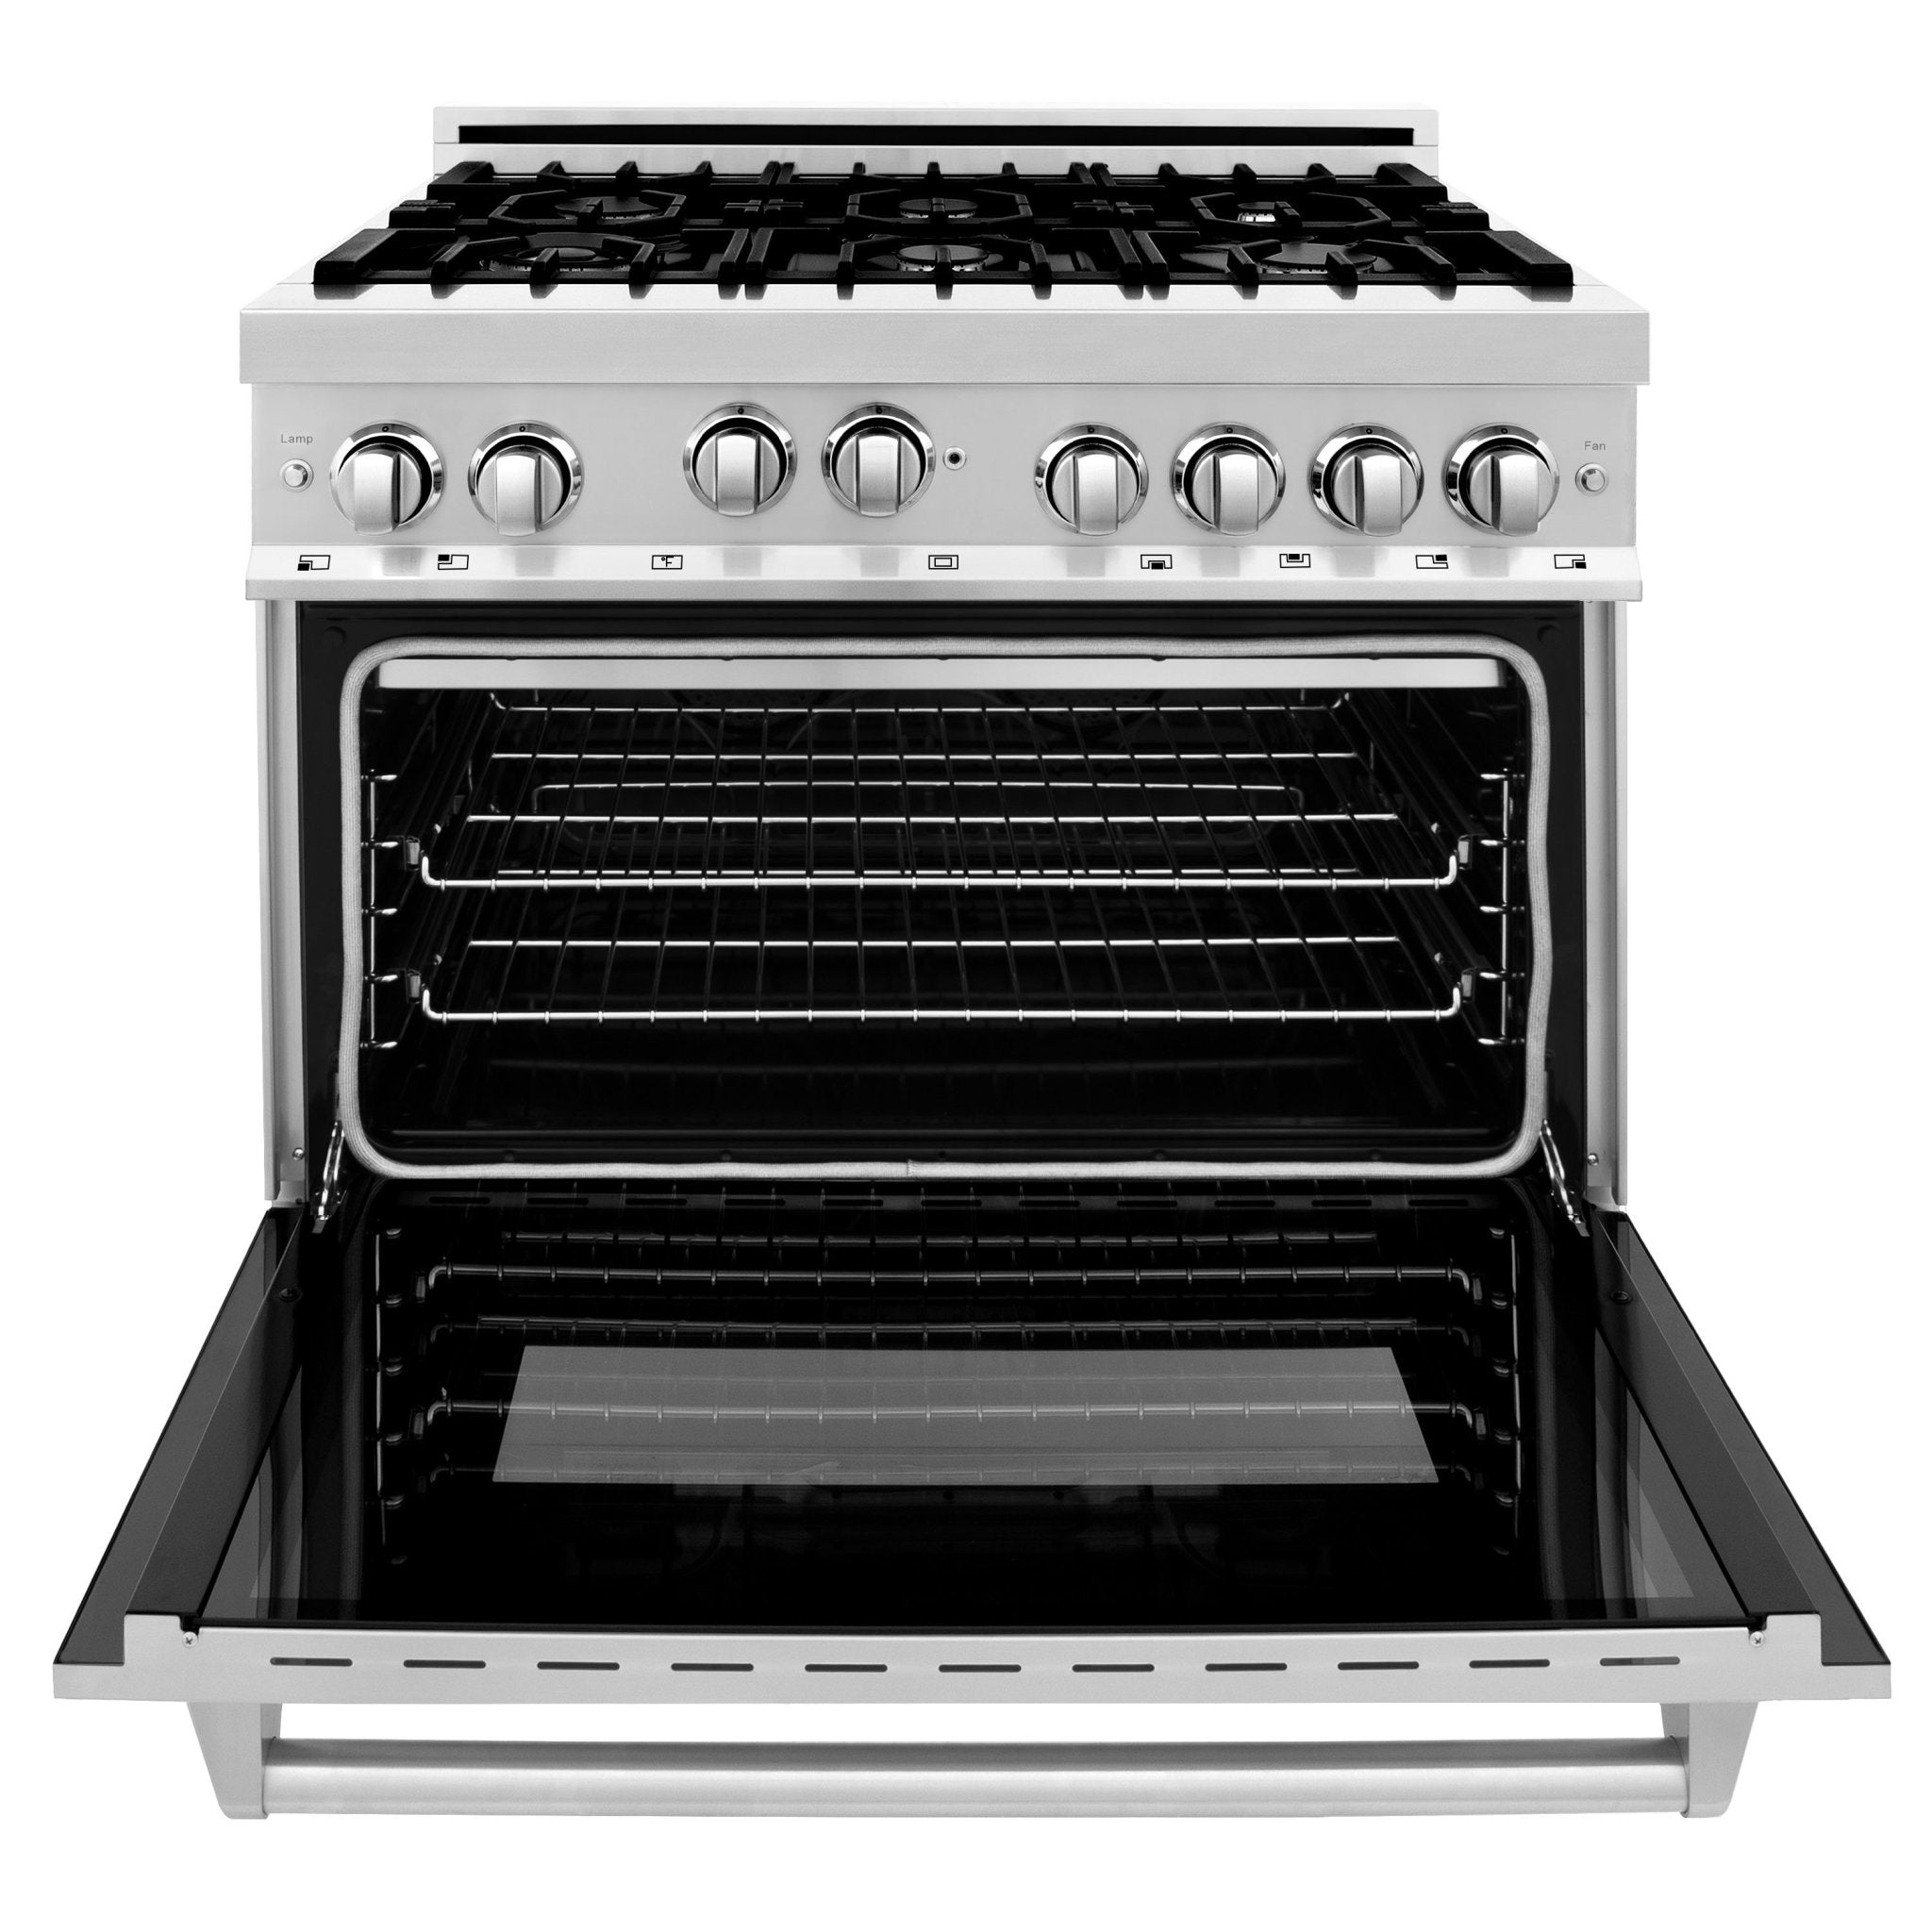 ZLINE 36" Professional 4.6 cu. ft. 6 Gas on Gas Range in Stainless Steel with Color Door Options (RG36) - Rustic Kitchen & Bath - Ranges - ZLINE Kitchen and Bath